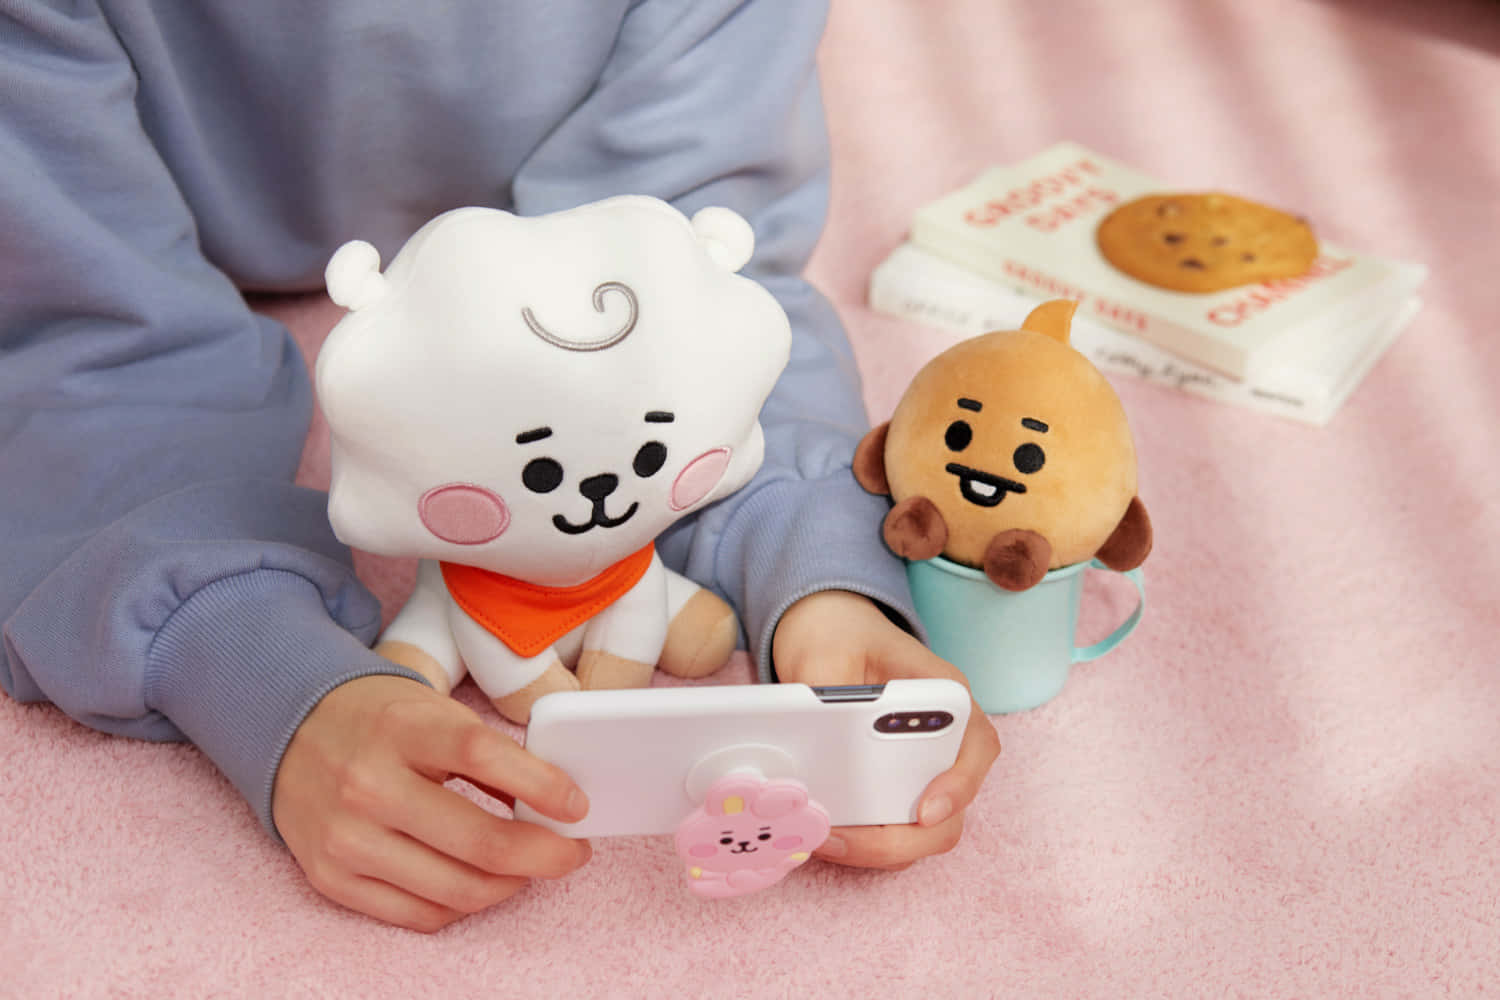 Fill your day with laughter and joy with BT21